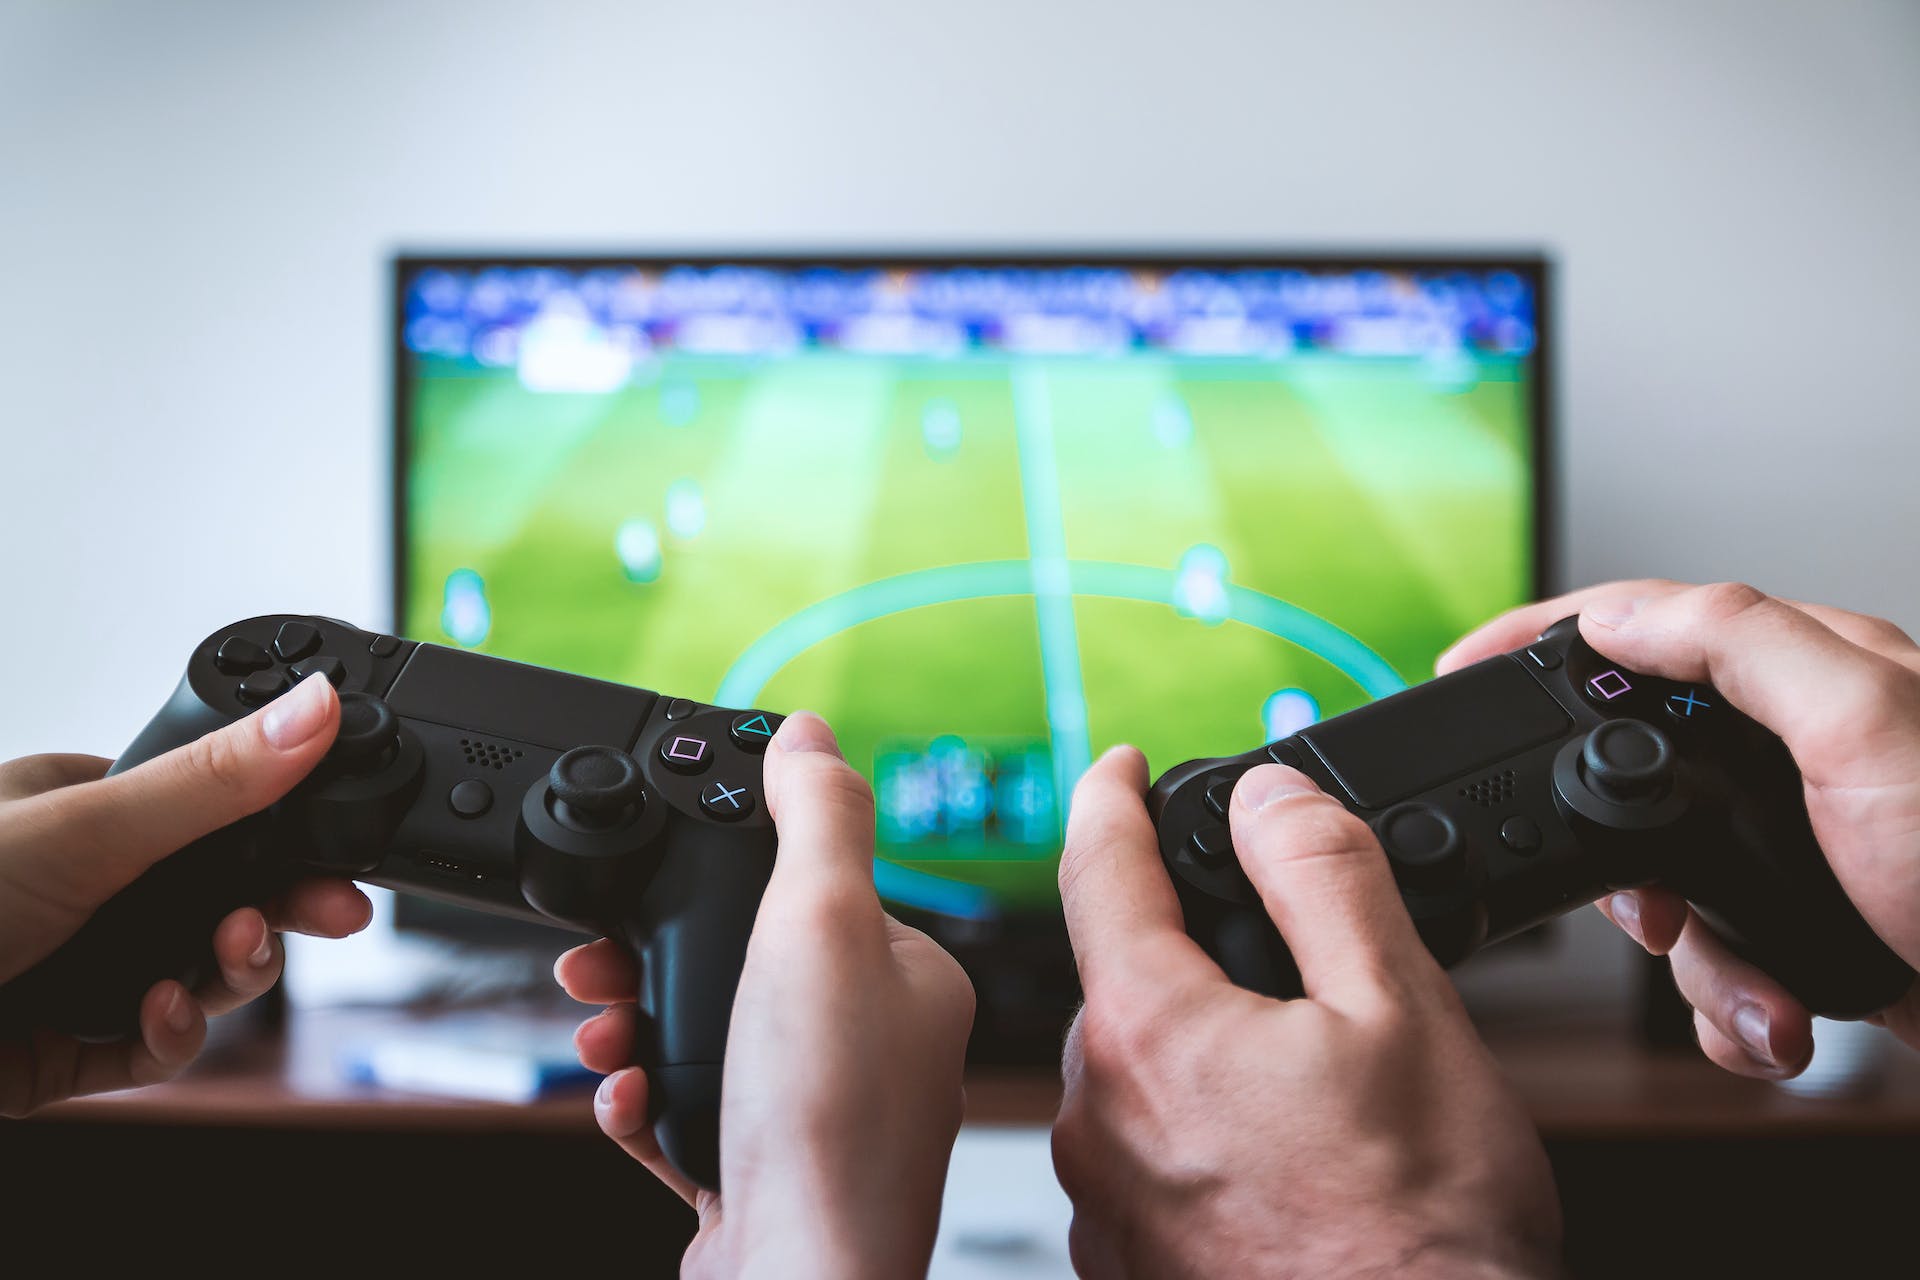 Two people playing a video game | Source: Pexels